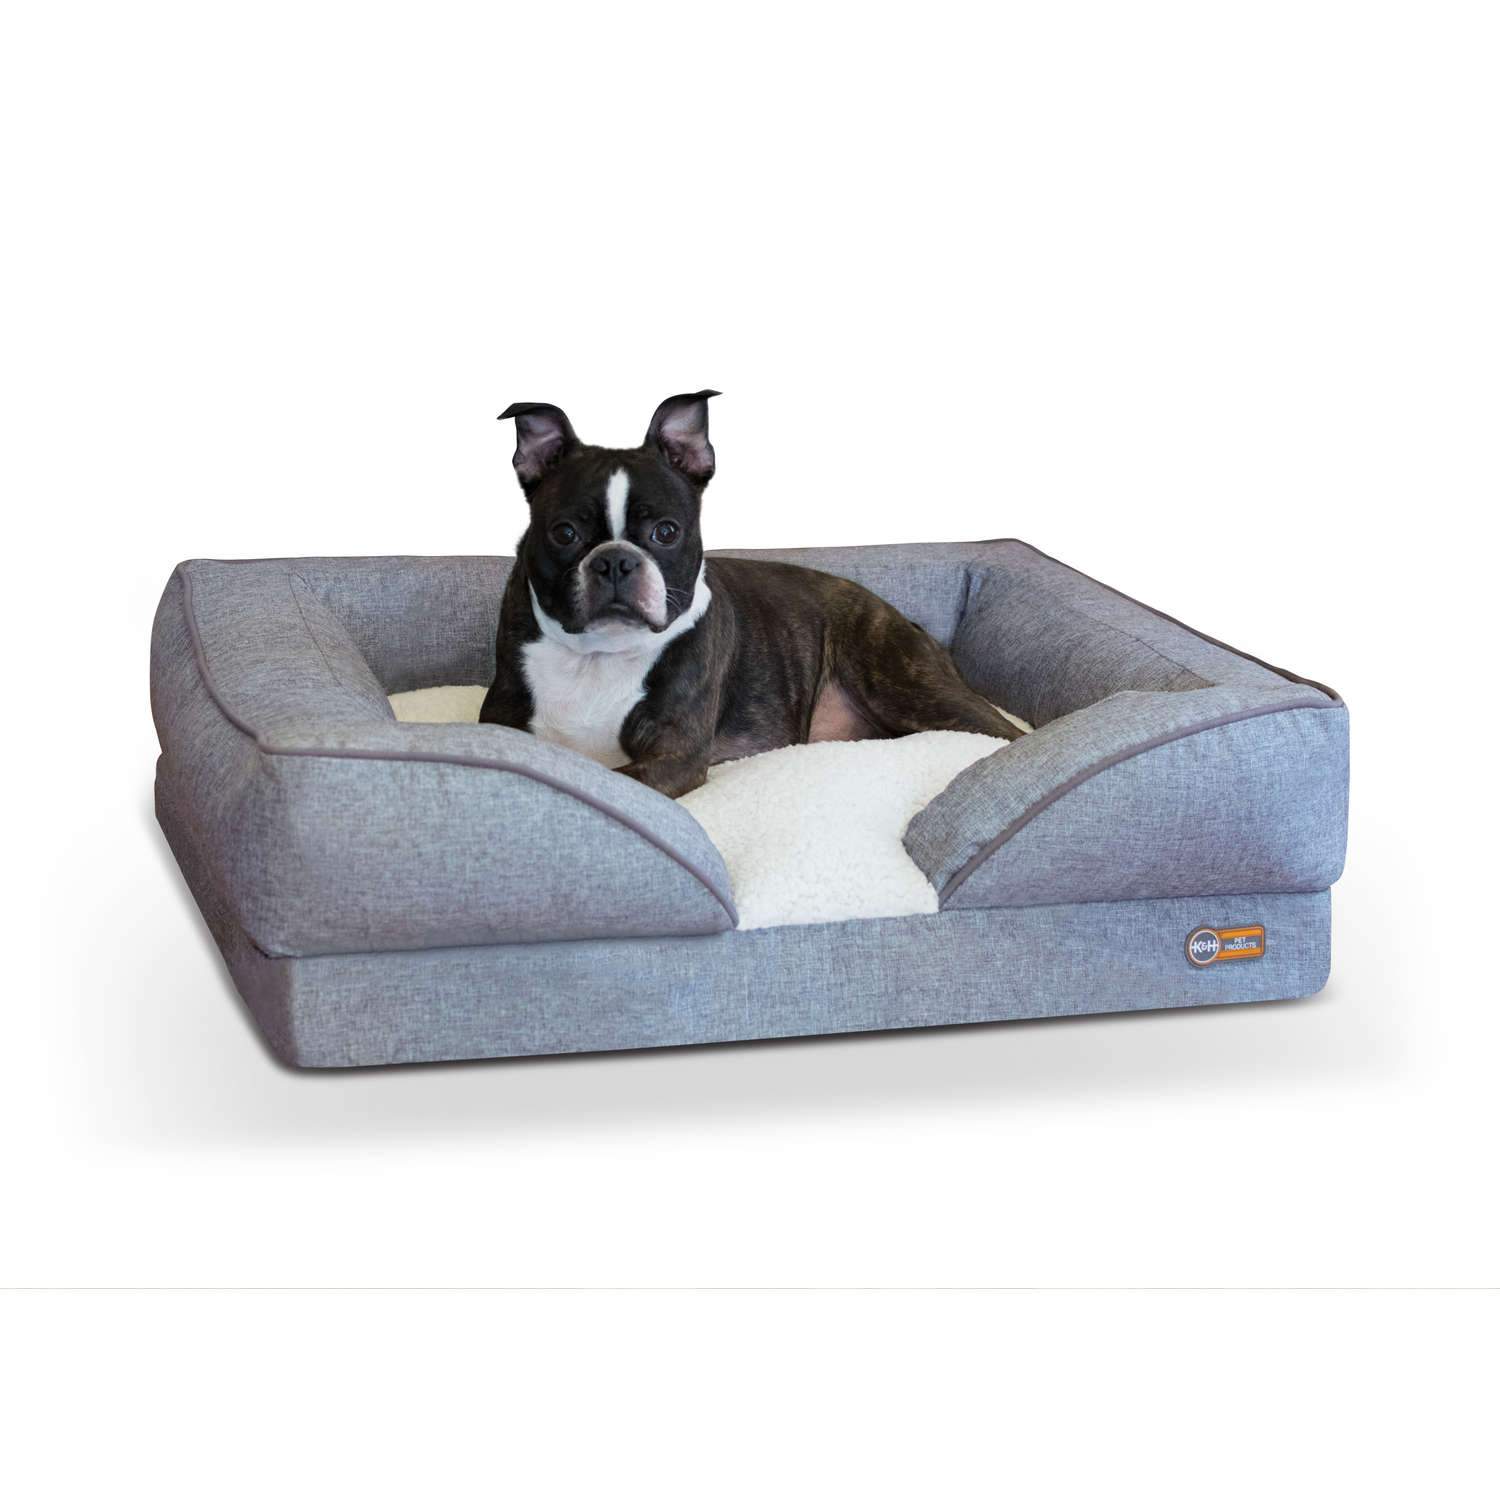 K&h Pet Products Kh4782 Pillow-top Orthopedic Pet Lounger